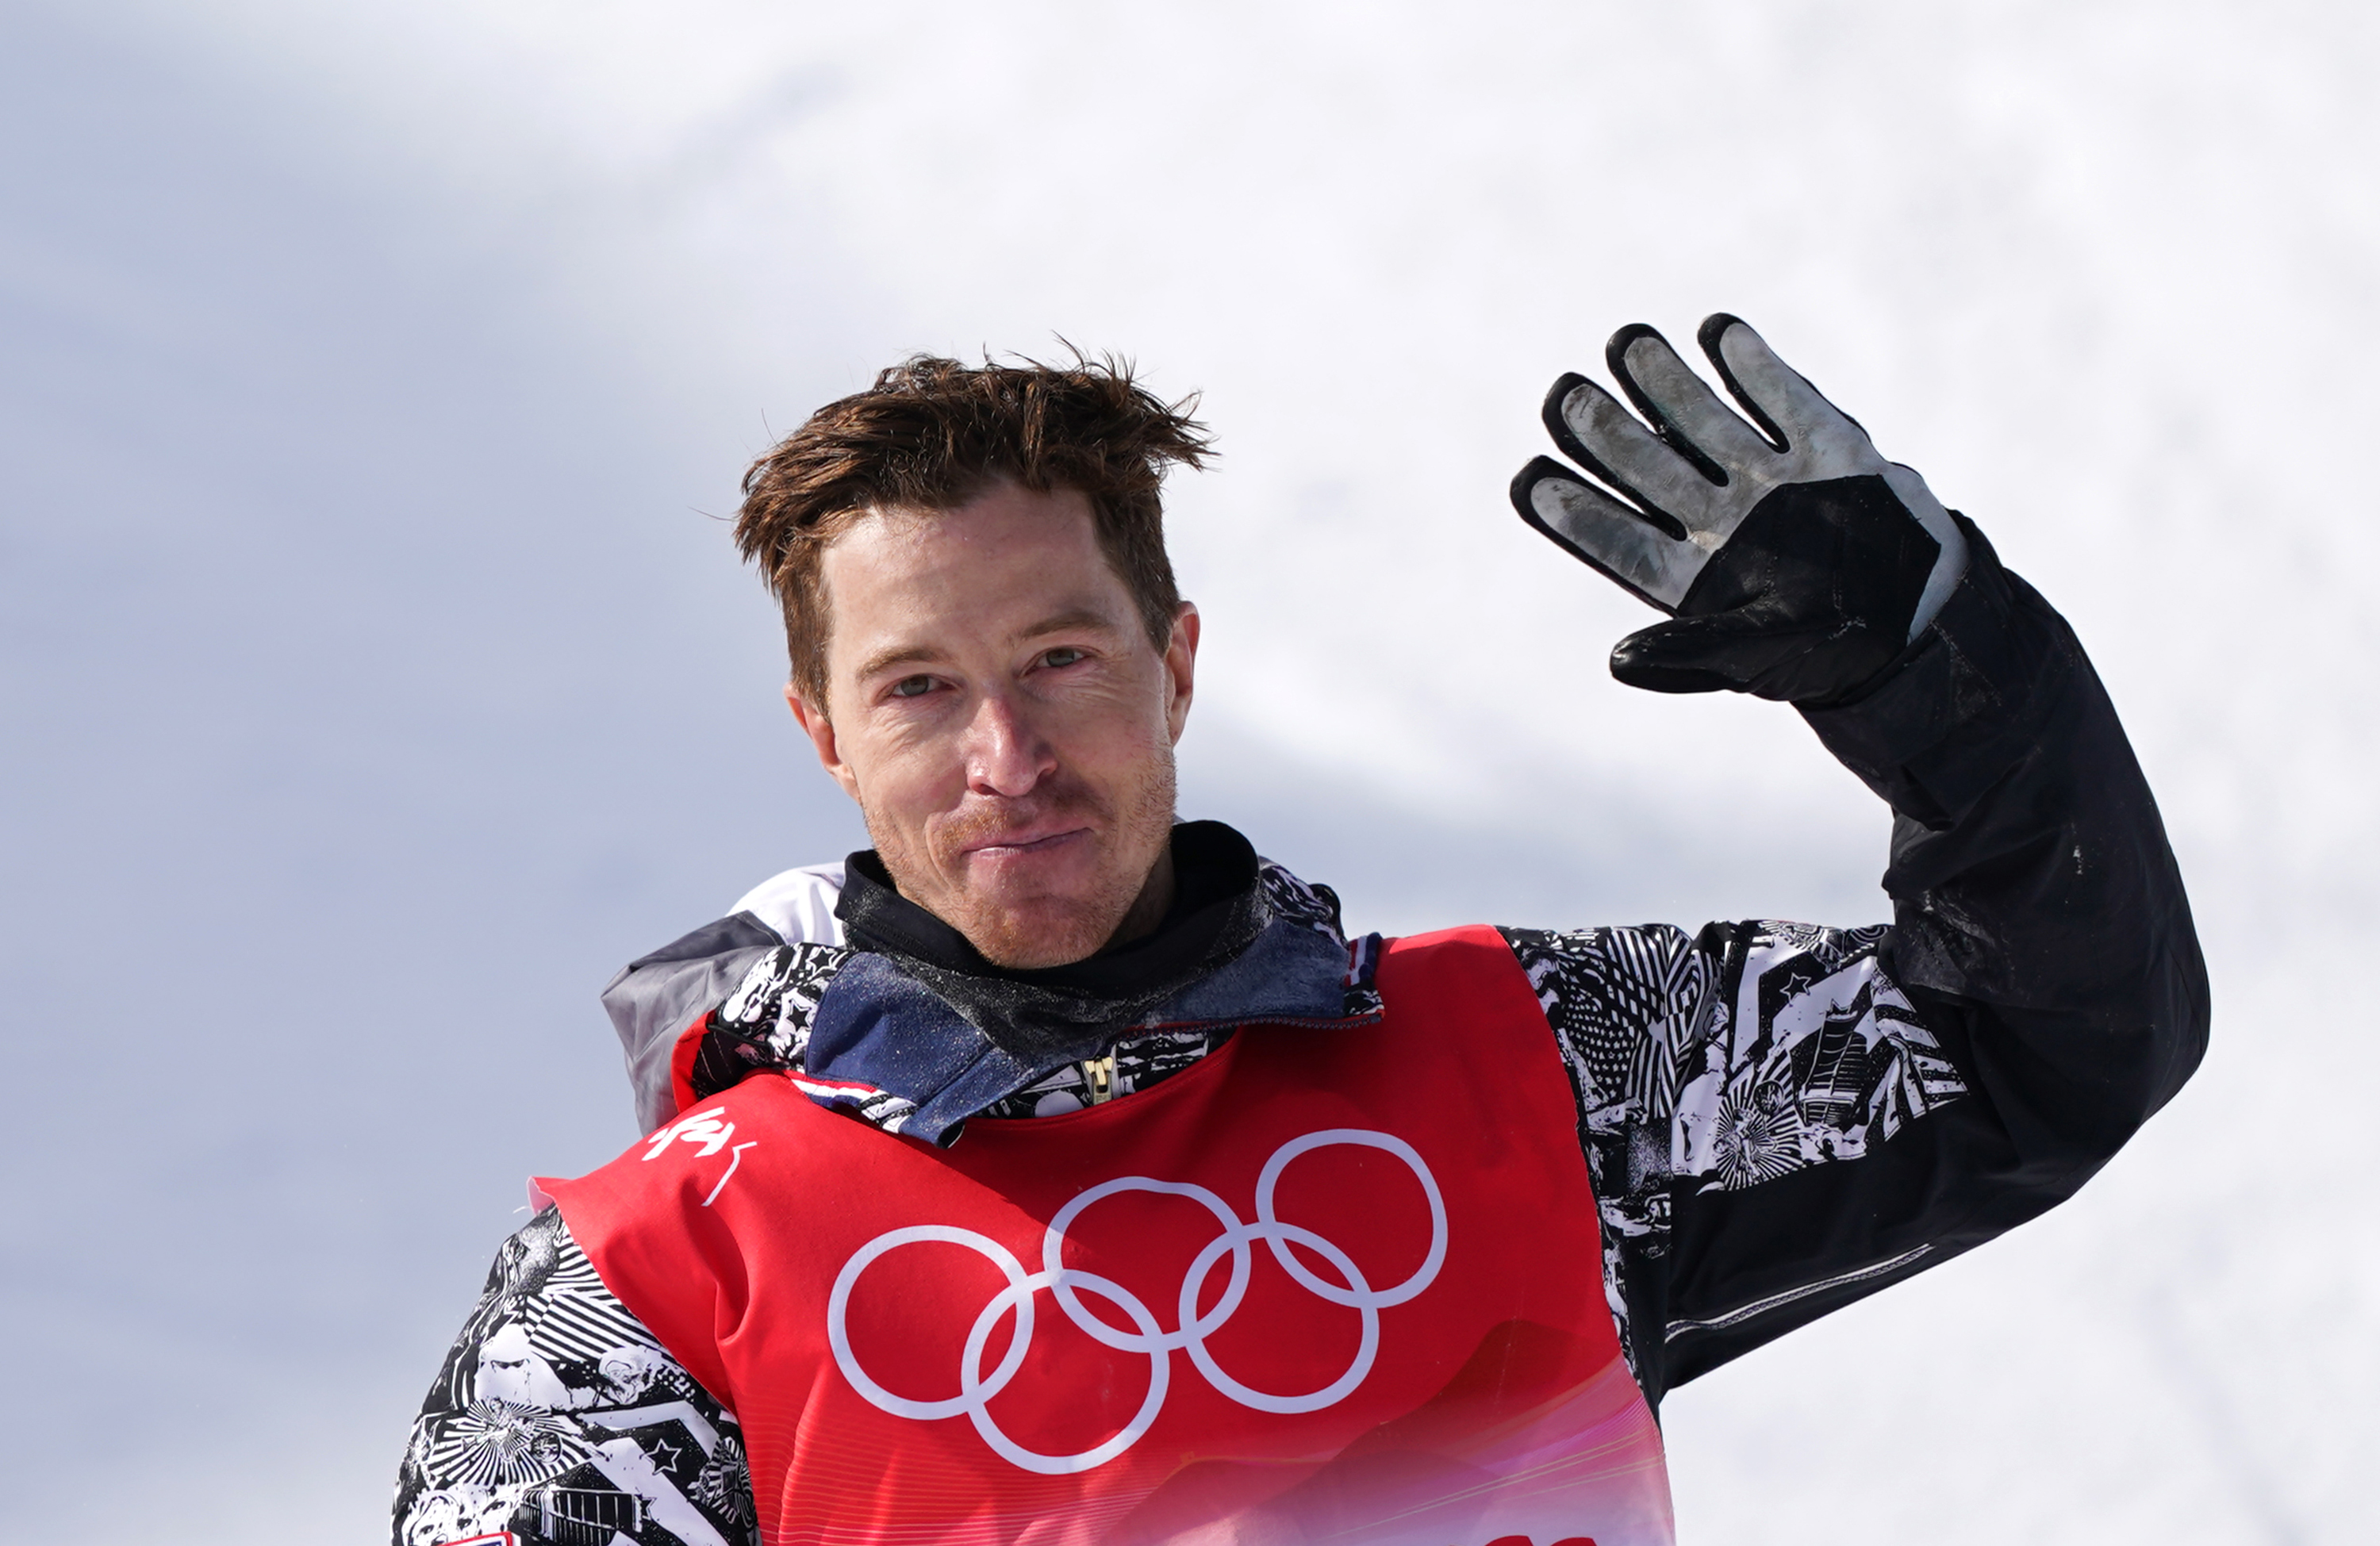 36) Shaun White thanks supporters and community Snowboarding has been